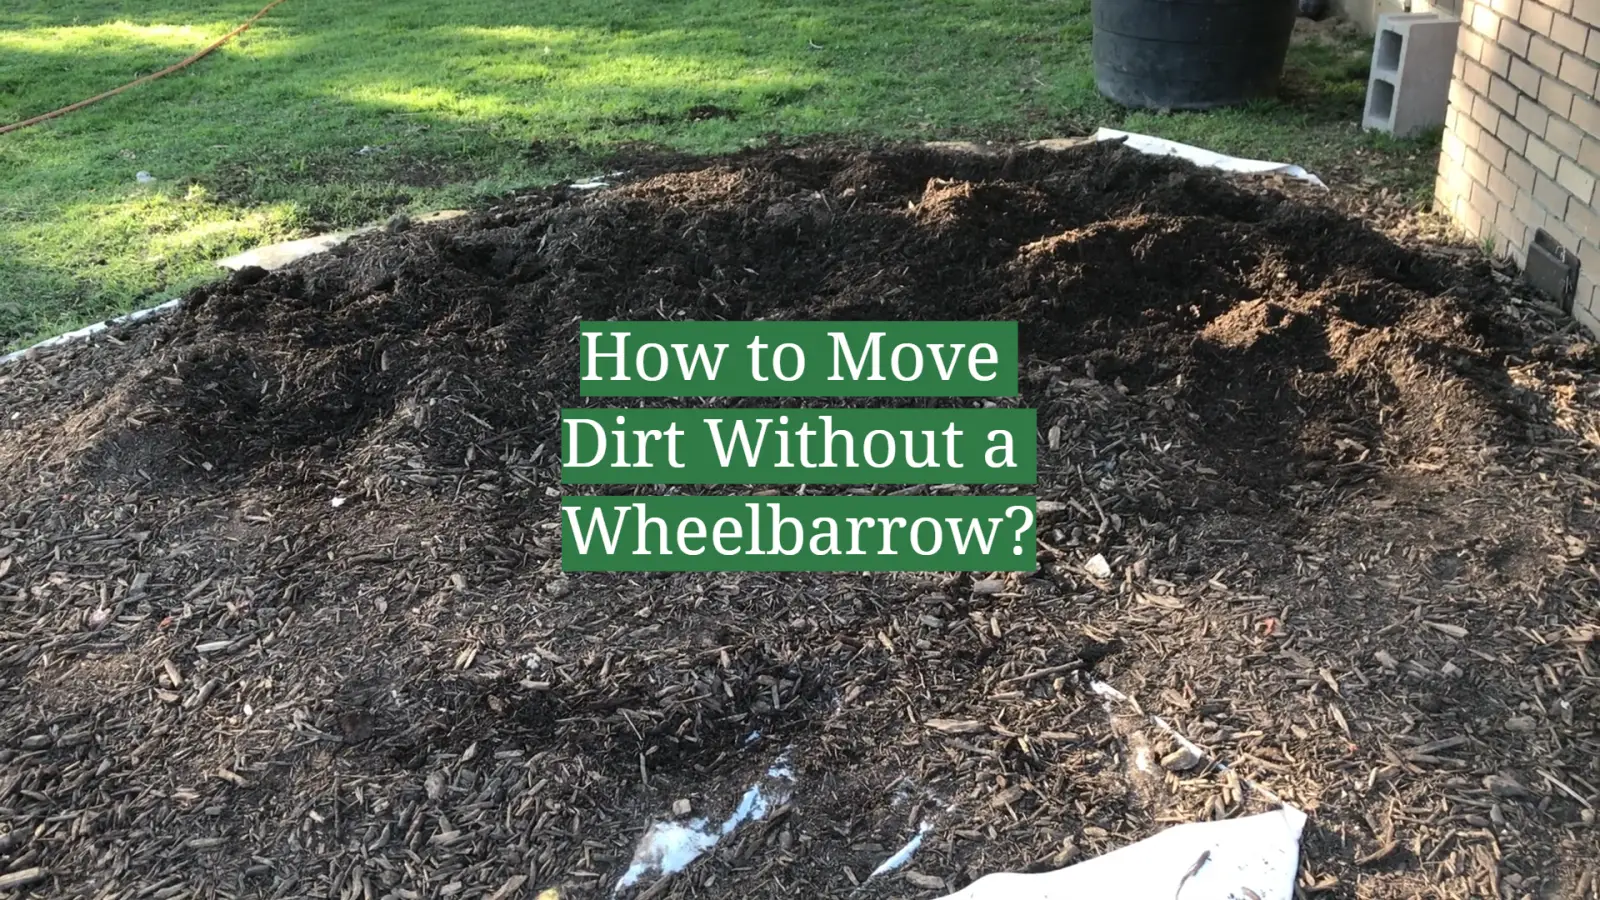 How to Move Dirt Without a Wheelbarrow?